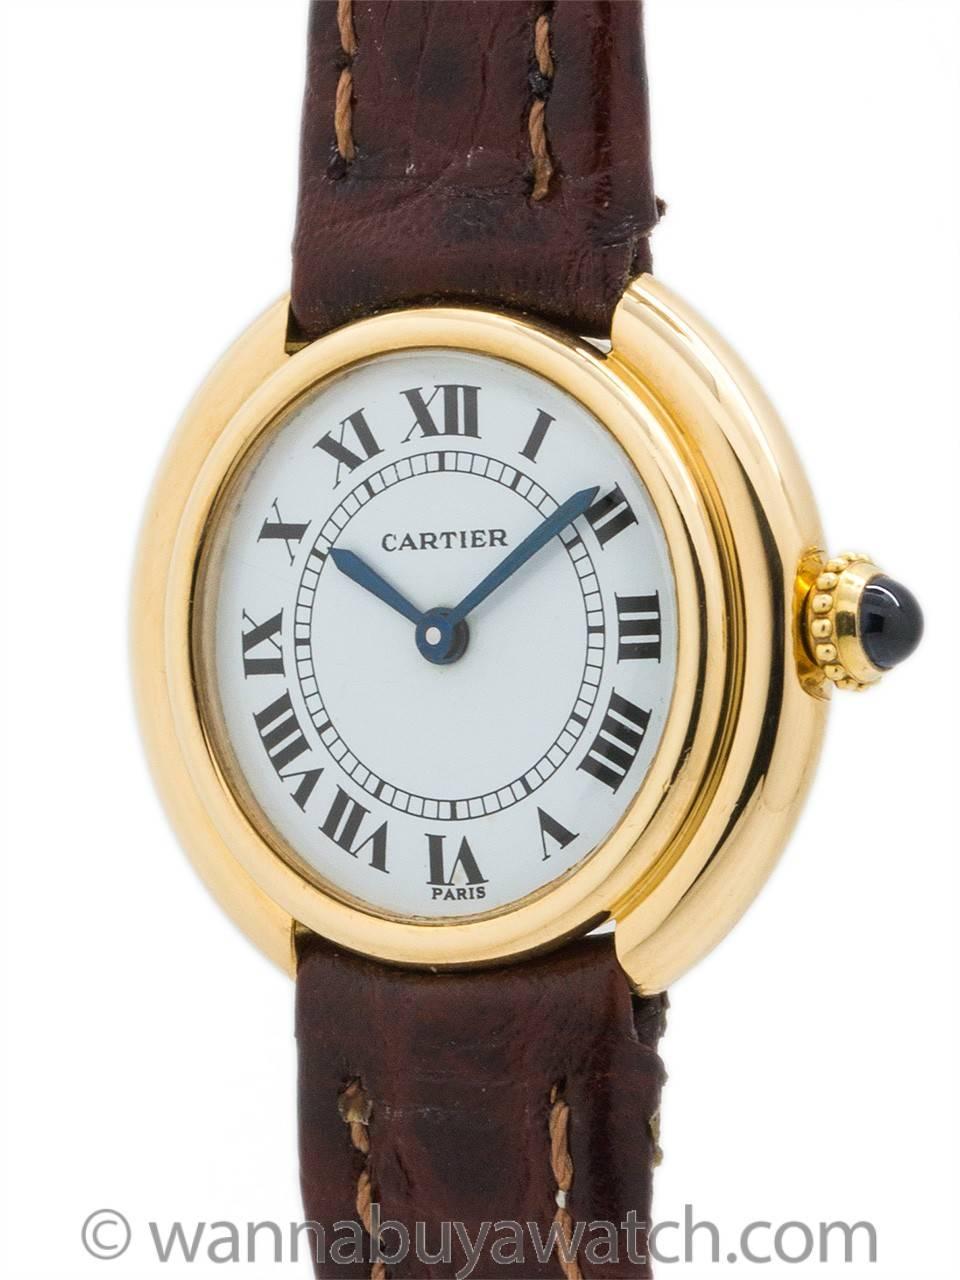 Lady’s Cartier 18K gold “Vendome tank” circa 1970’s. Featuring a 26 x 23mm round case with rounded stepped case design. Featuring white gloss dial with classic Cartier Roman figures, blued steel hands, and powered by 17 jewel manual wind movement